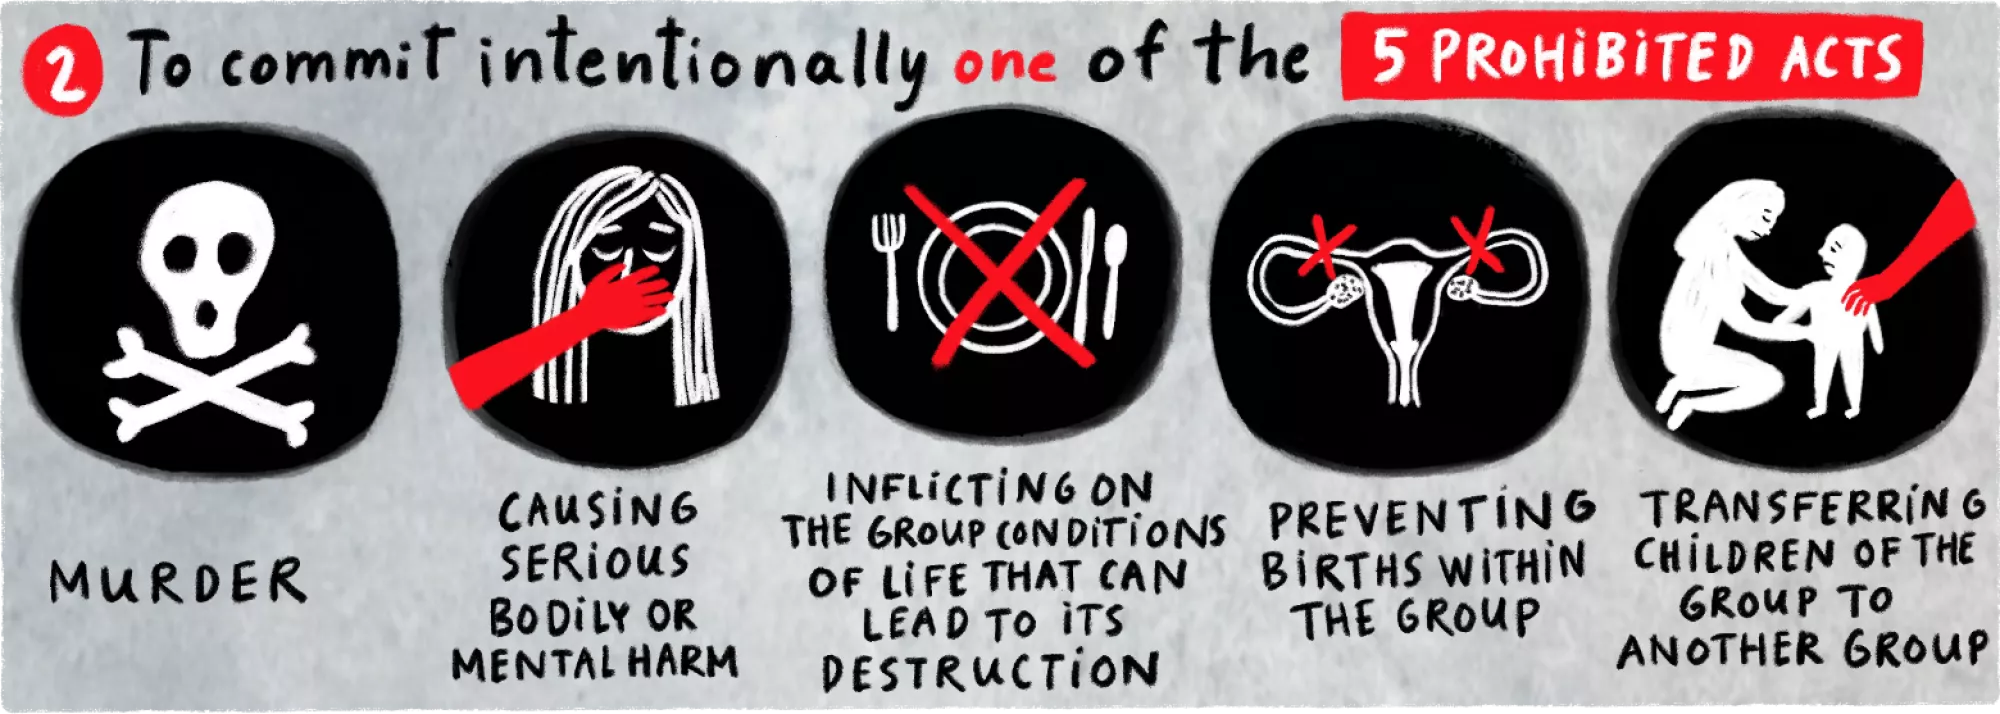 An illustration describing the 5 prohibited acts of genocide